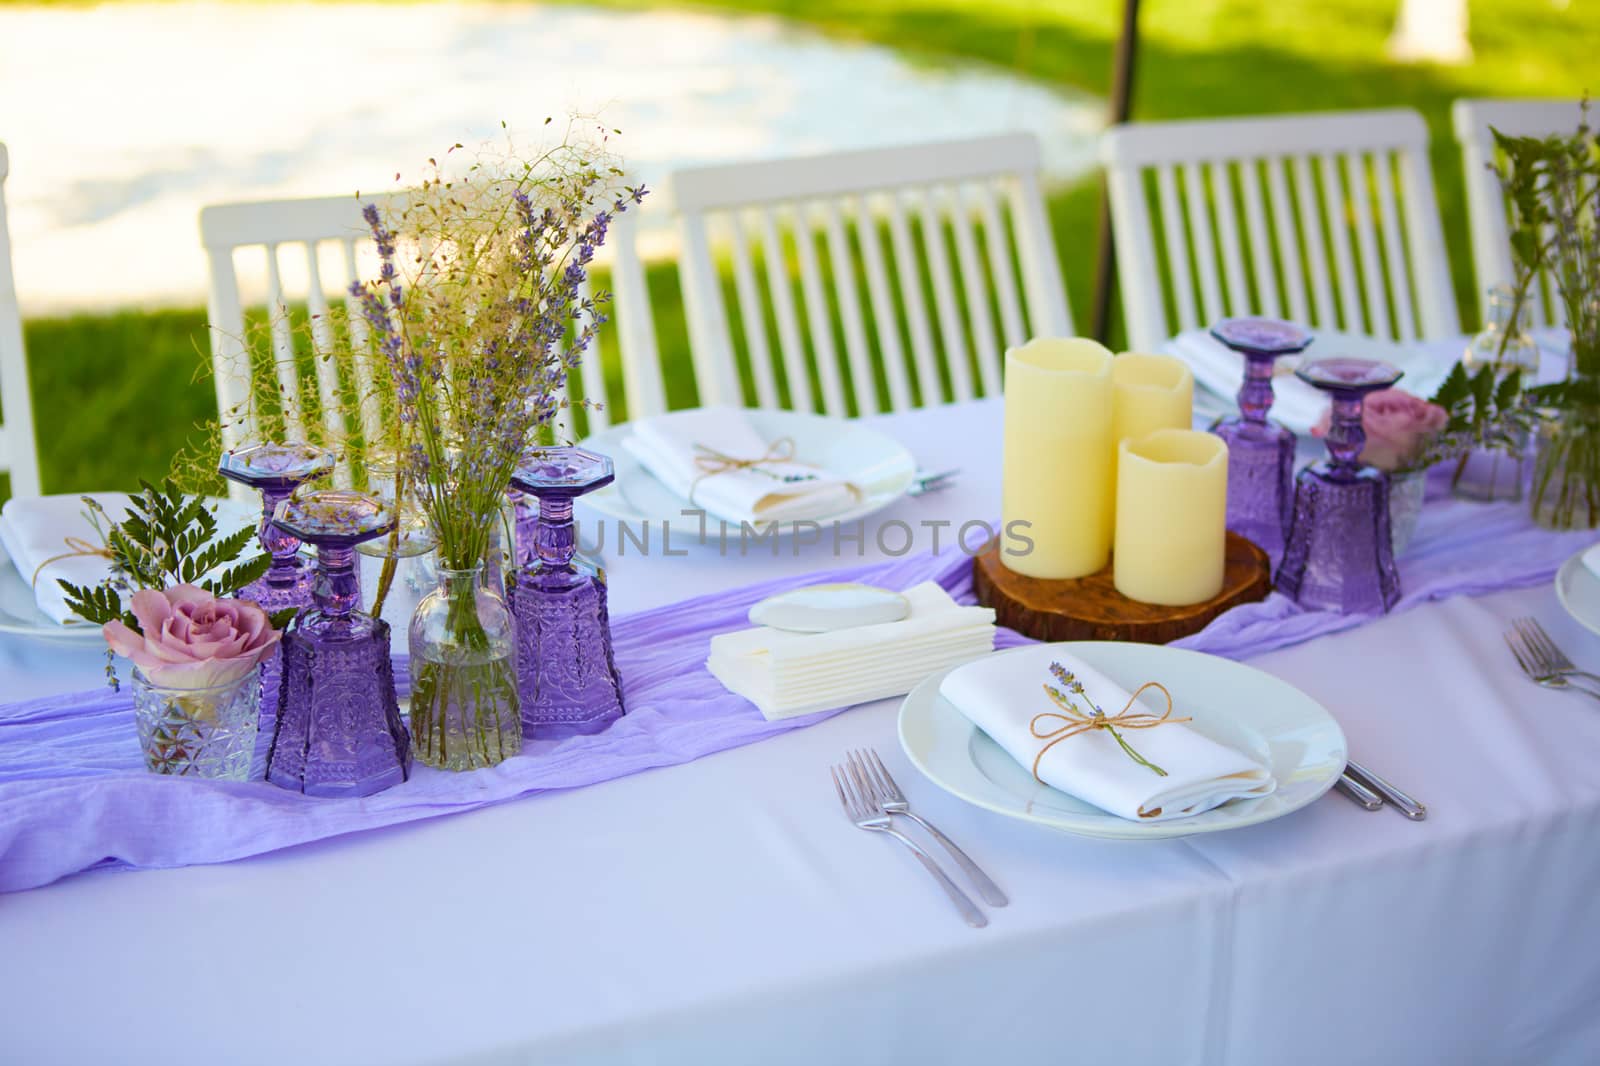 Elegant table setting for wedding engagement Easter dinner with white ceramic plates cotton napkin tied with twine lavender flowers candles. Provence style.